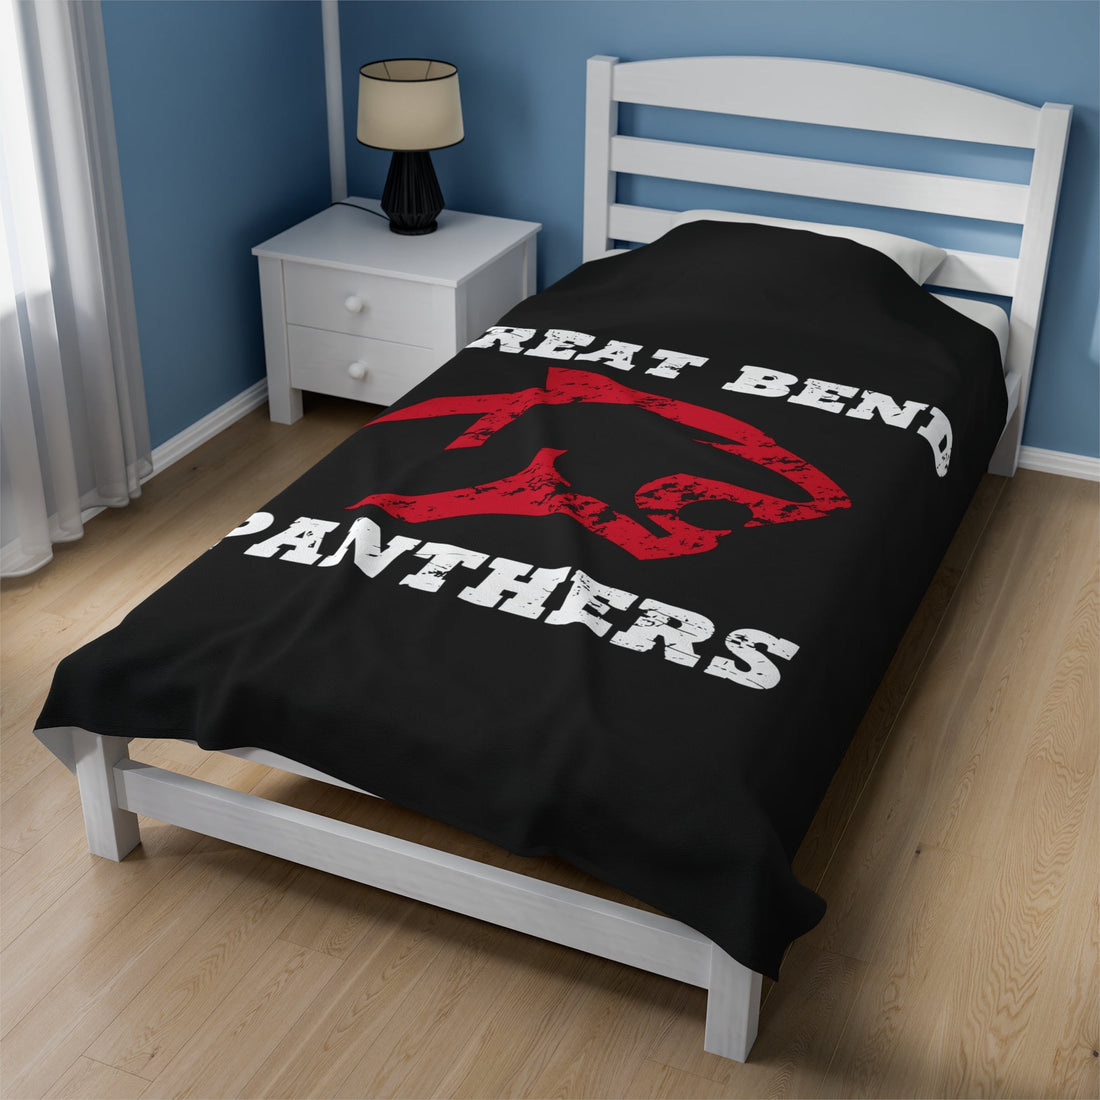 Great Bend Panthers Velveteen Plush Blanket - All Over Prints - Positively Sassy - Great Bend Panthers Velveteen Plush Blanket